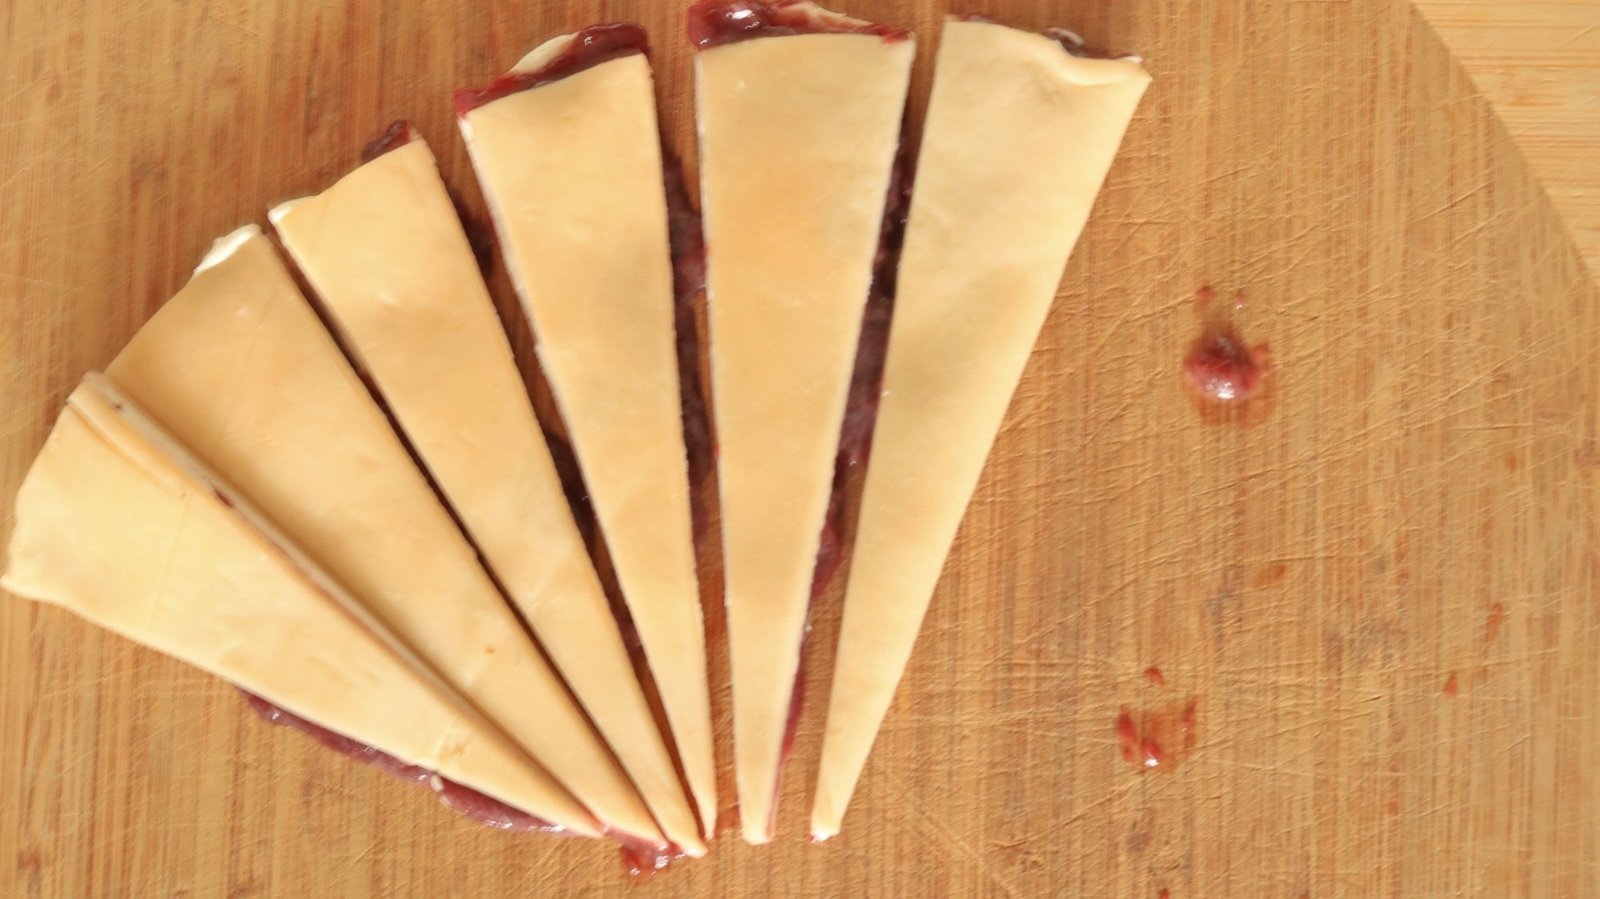 Small wedges of pie crust that have been filled with jam and cream cheese.